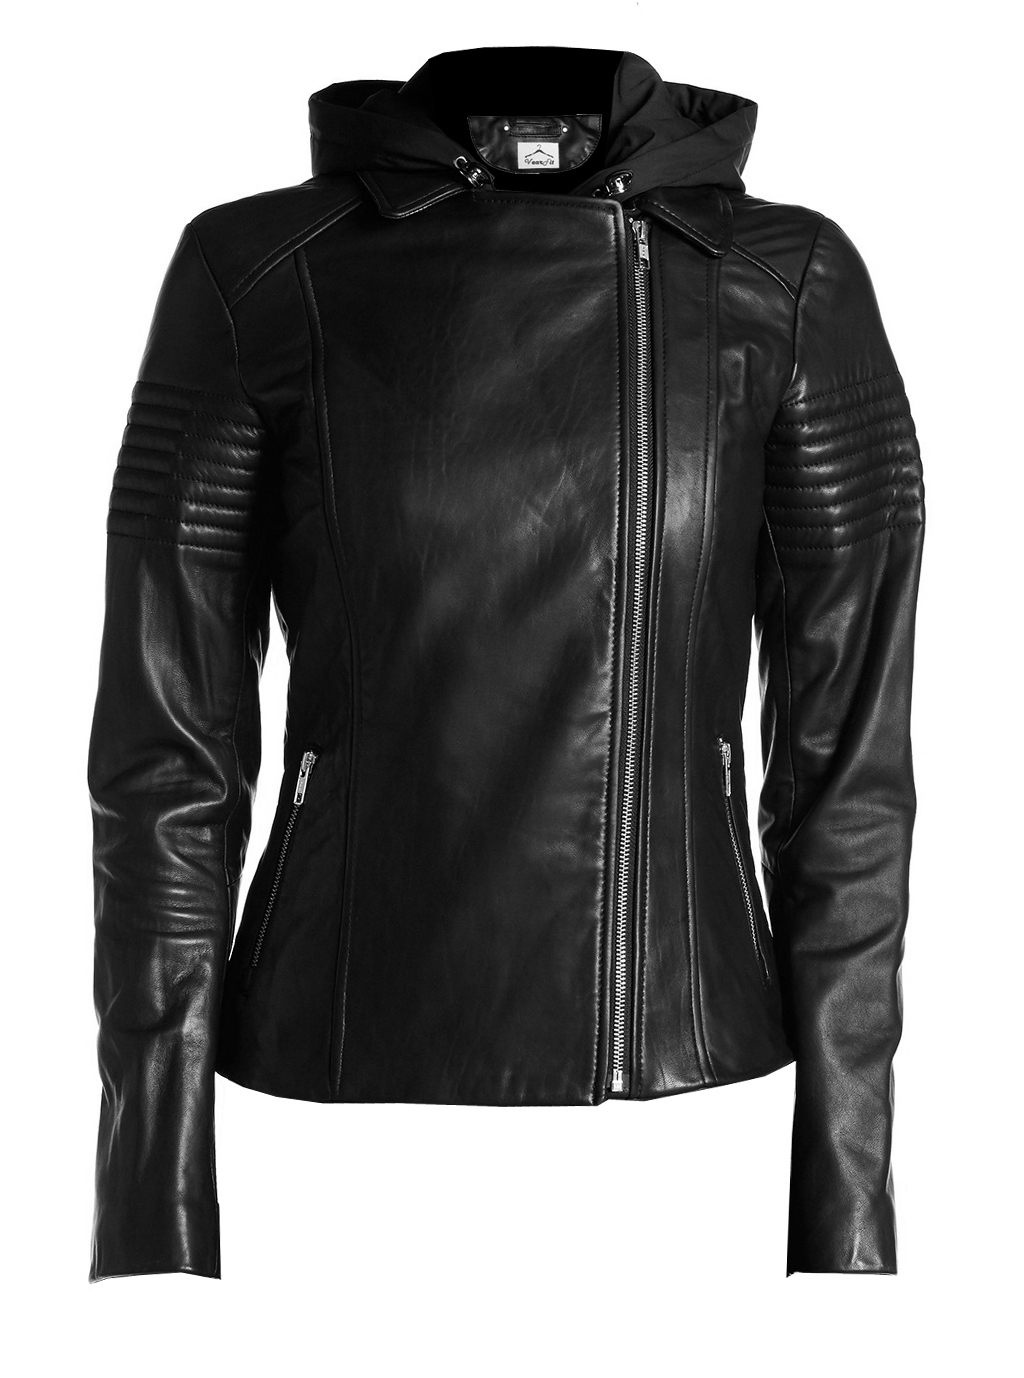 Hooded Women Leather Jackets Zippy side pockets Quilted Design